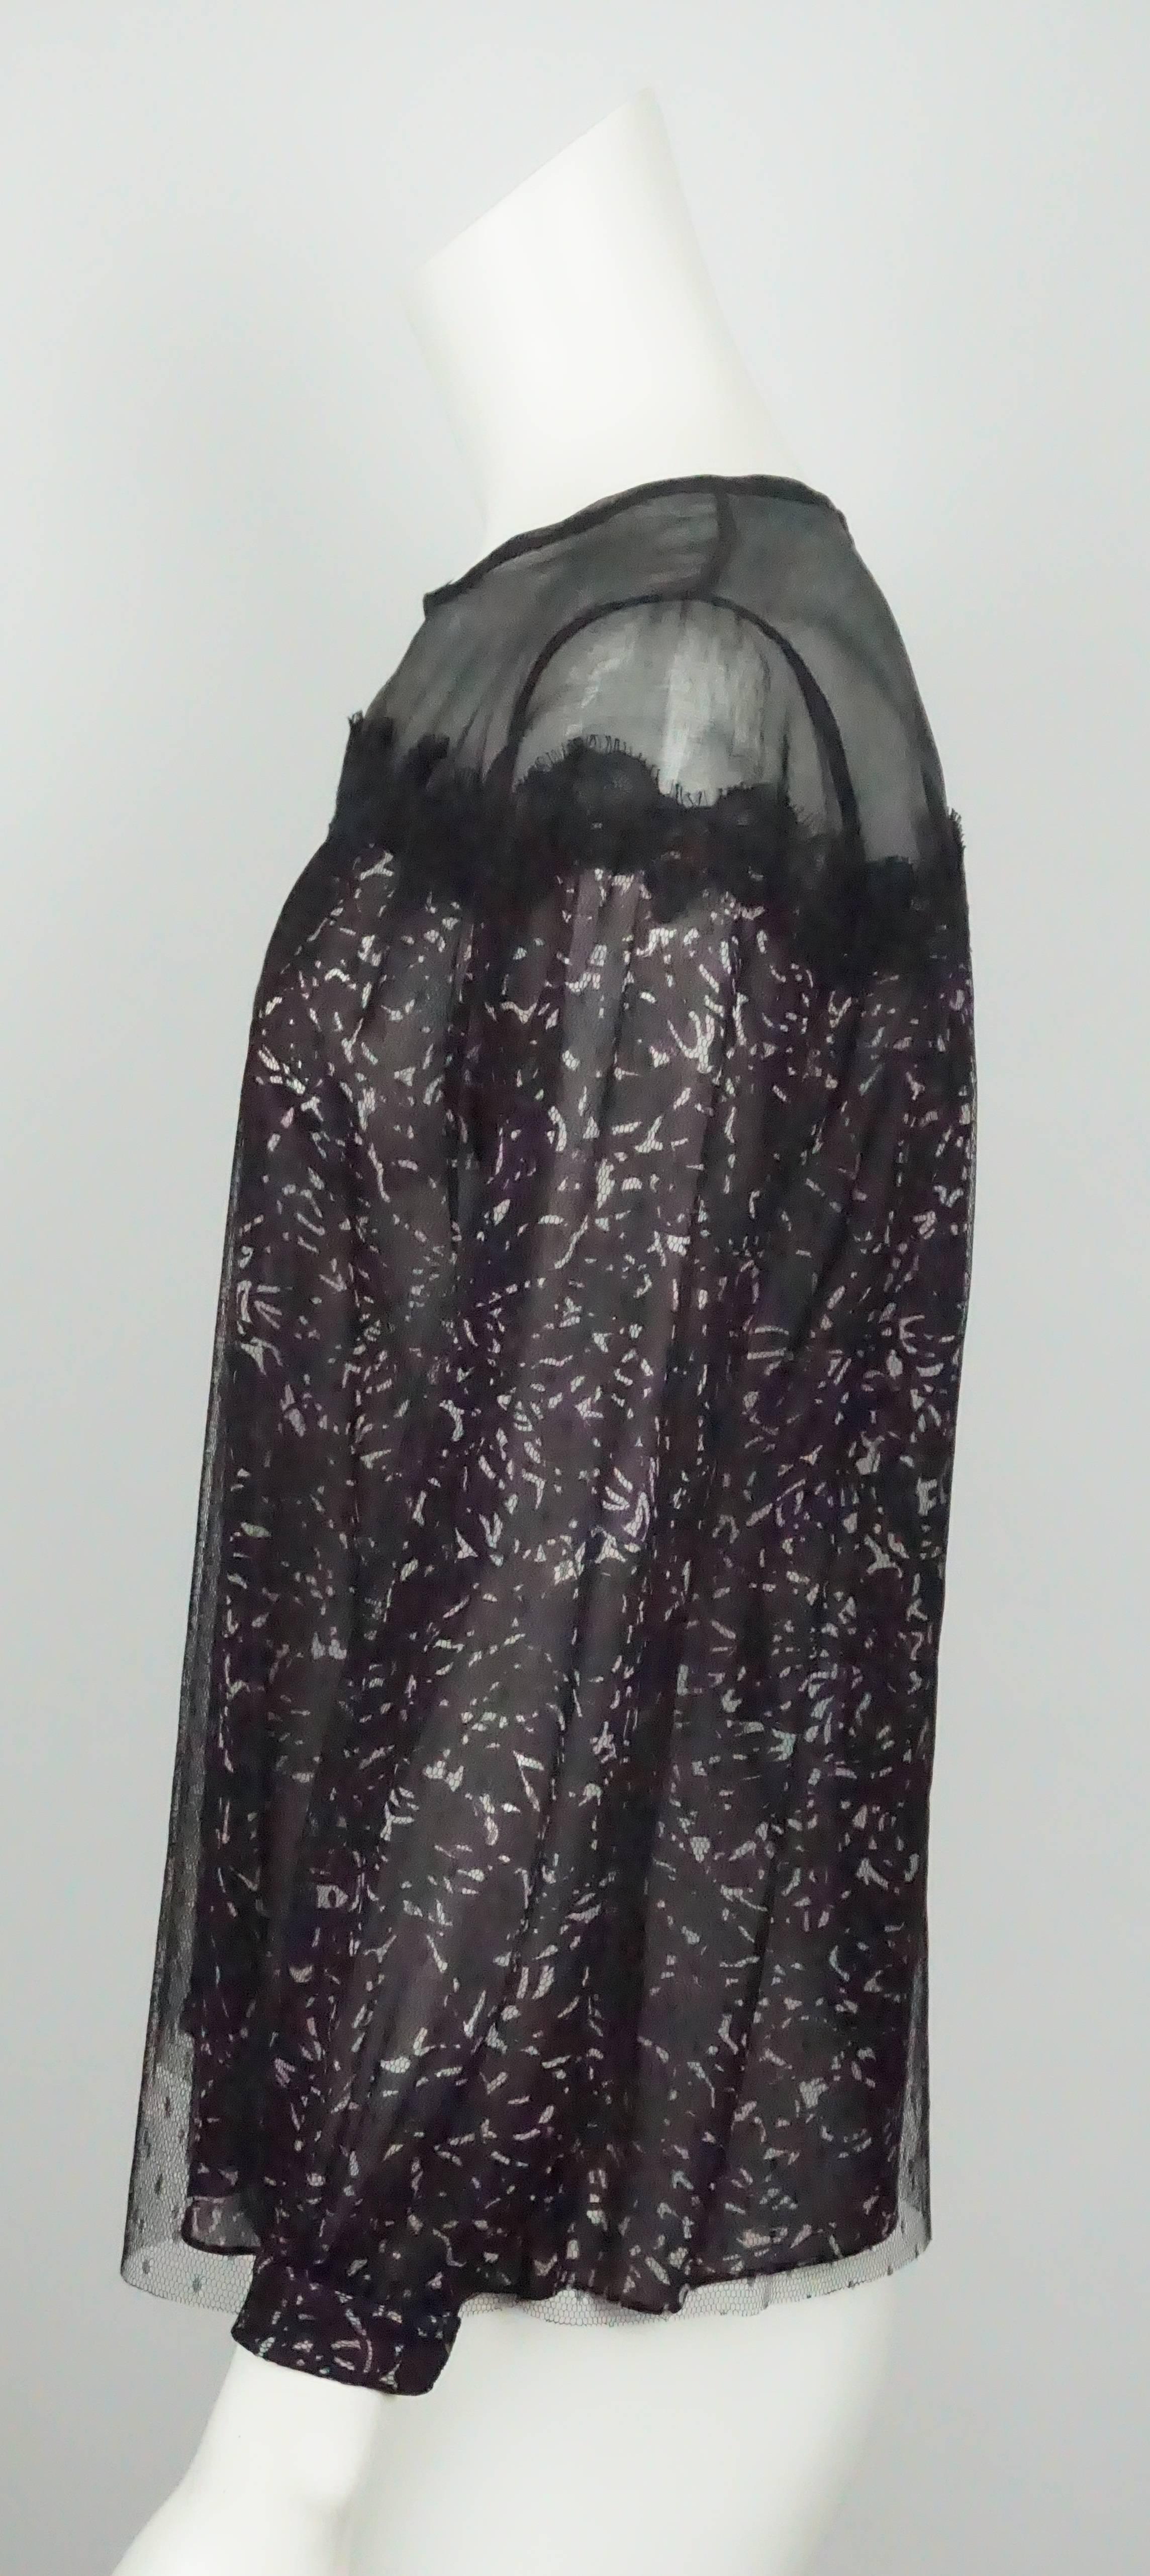 Oscar De La Renta Black/White/Purple/ Chiffon Print Top - 8  This beautiful lace and nylon top is in excellent condition. The top is made of a small print in black, purple, and white. It has an extra layer of tulle that has a polka dot detail on the